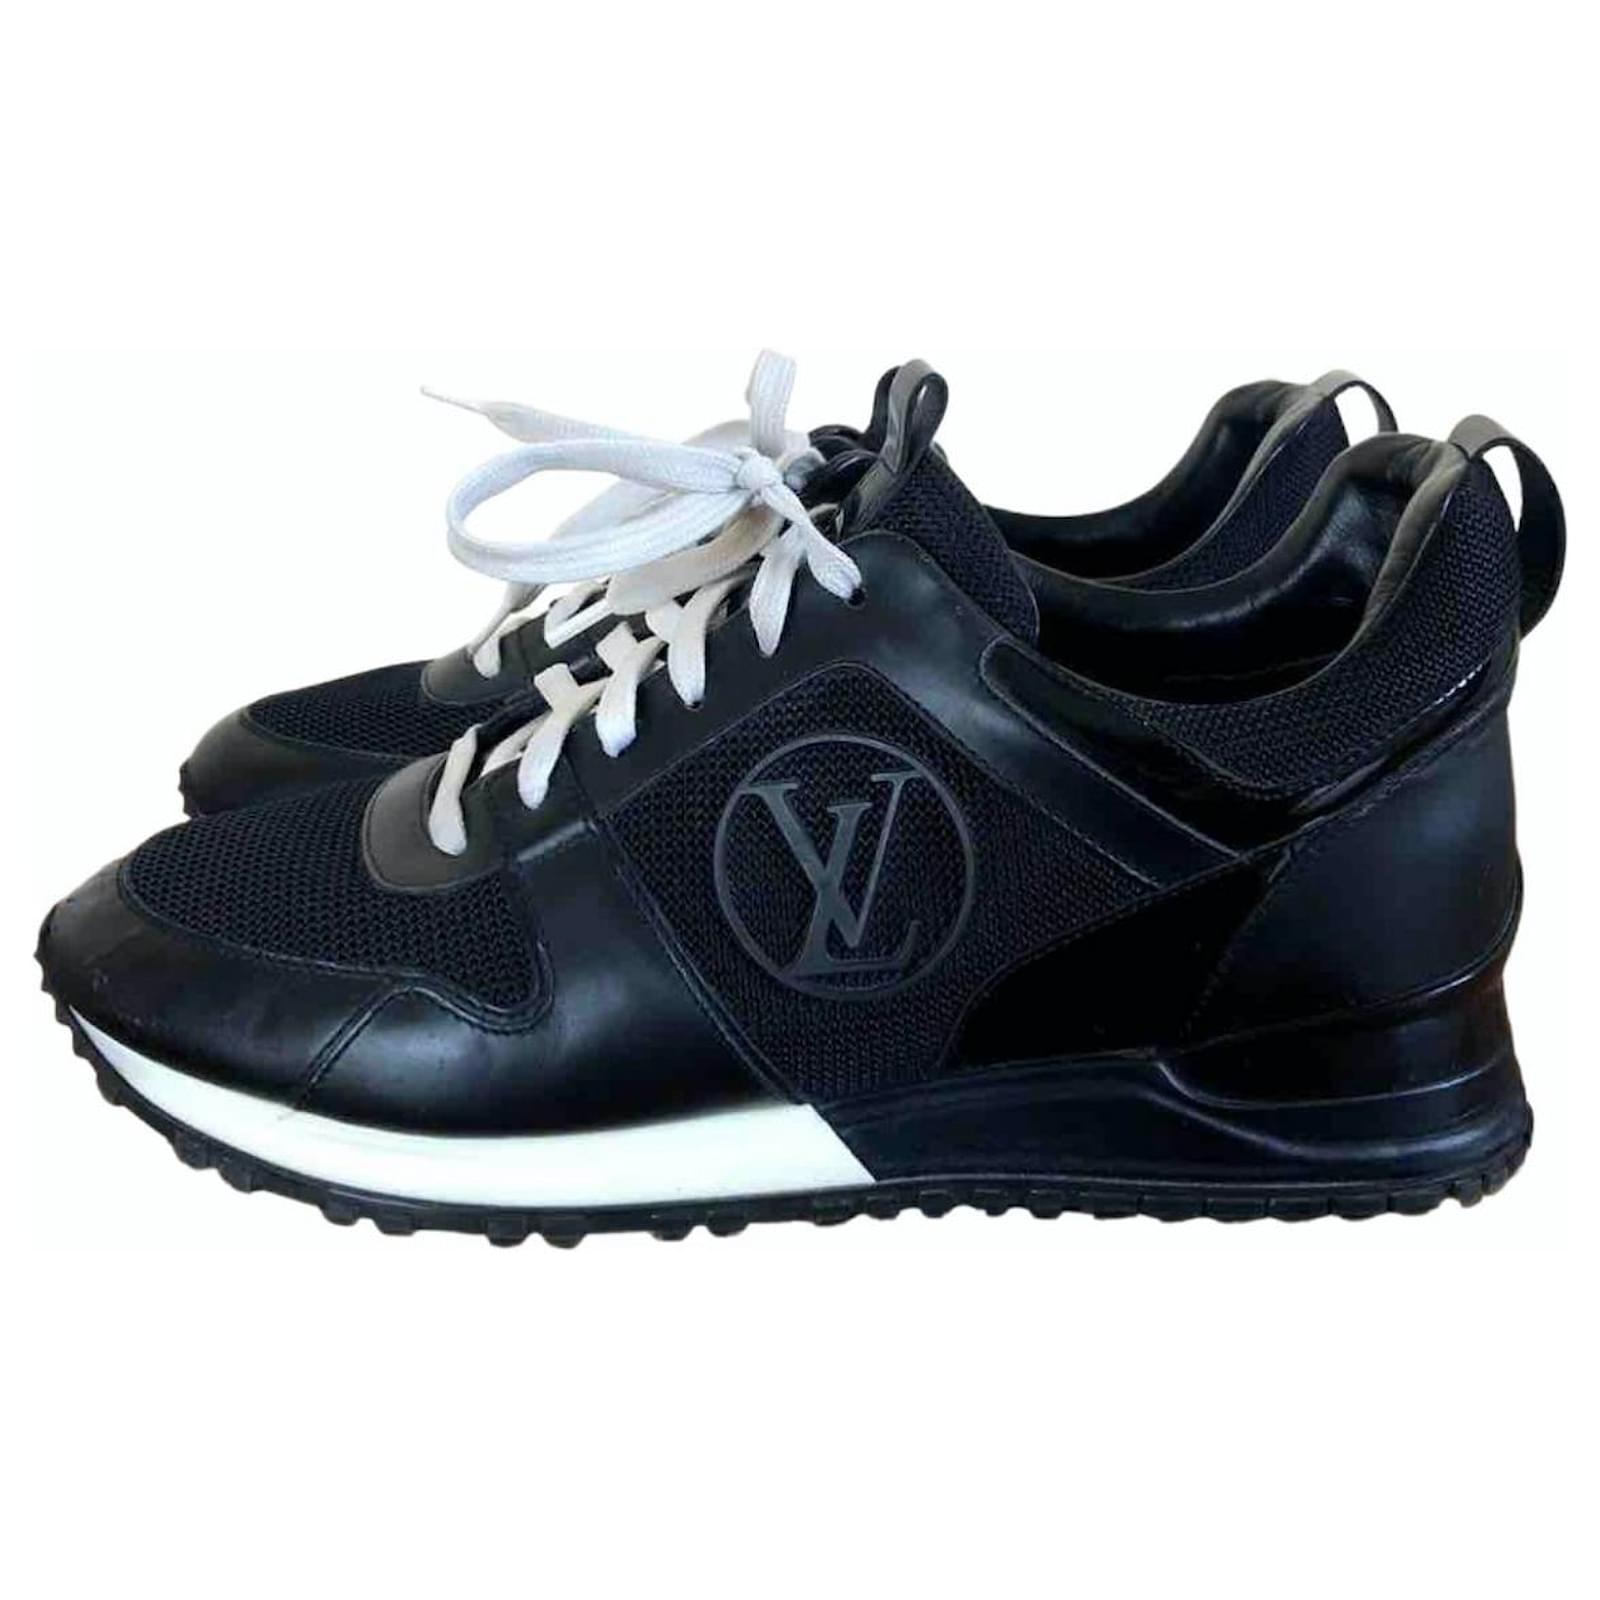 Louis Vuitton - Authenticated Run Away Trainer - Leather Black for Women, Very Good Condition